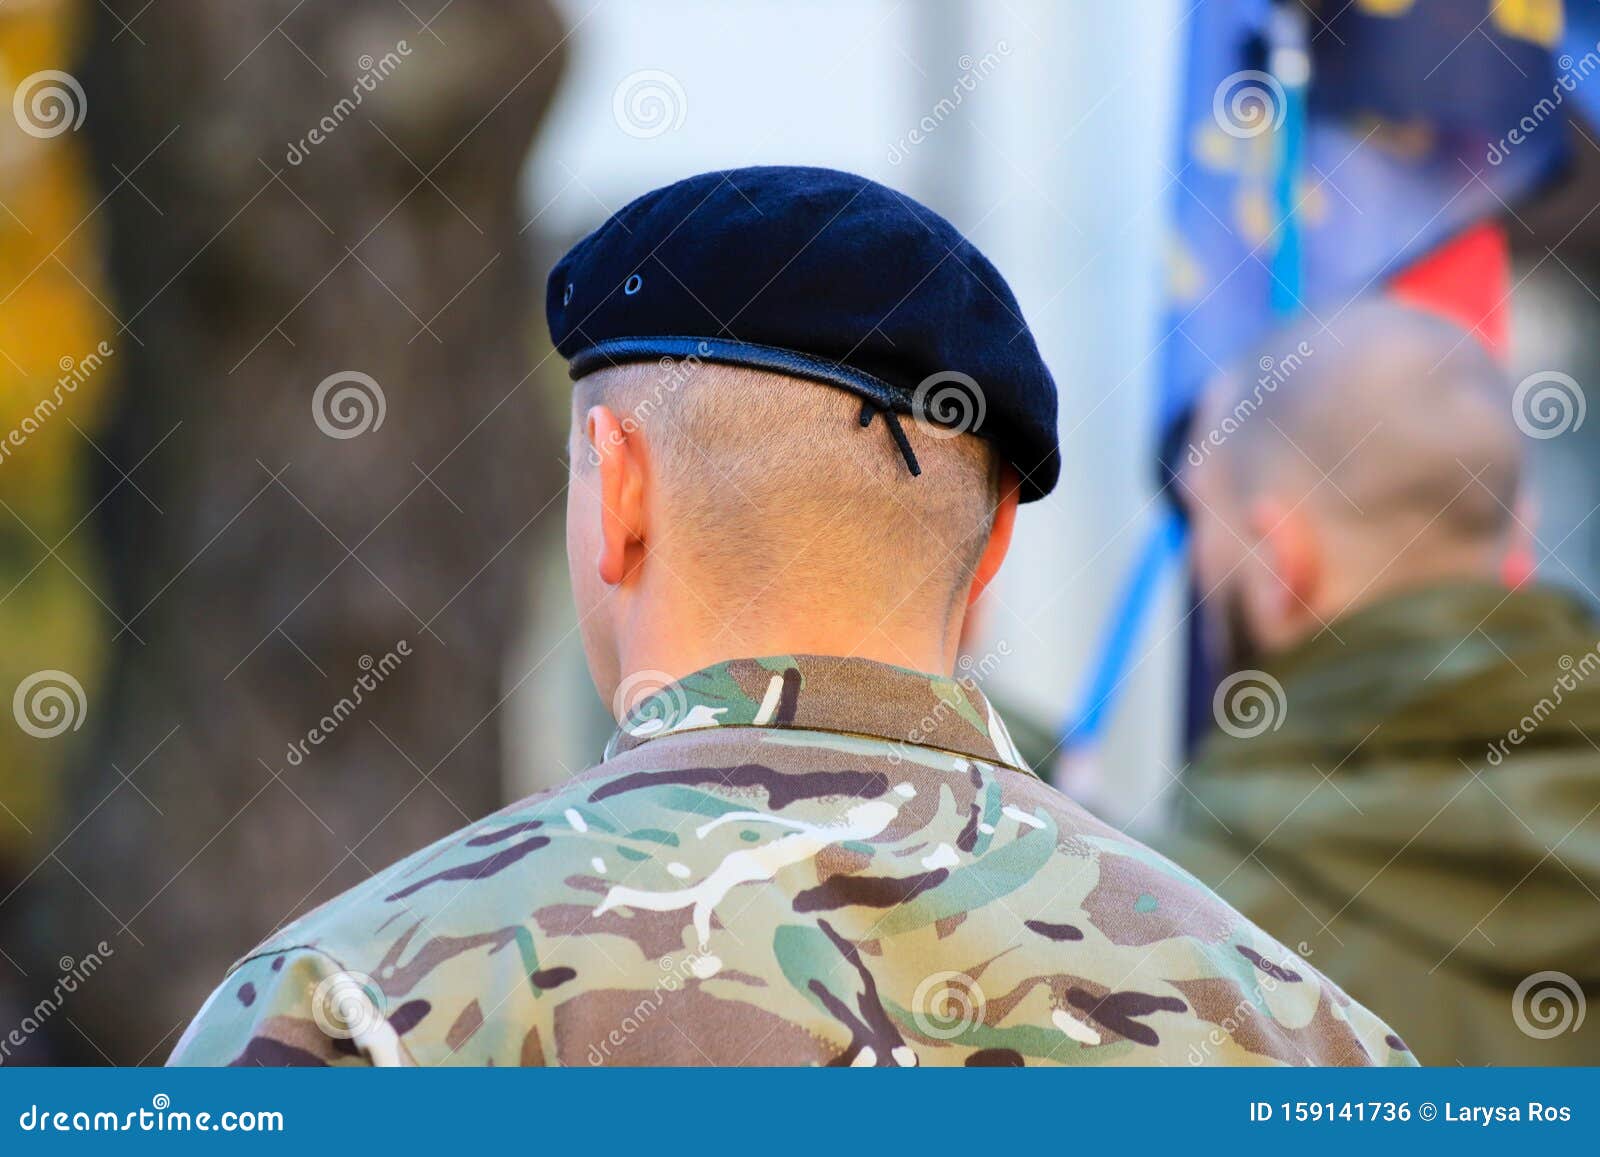 Soldier Of The Ukrainian Army In Beret Is Standing In The Parade. Defender  Of Ukraine Day. Armed Forces Of Ukraine Editorial Photo - Image Of Street,  Soldiers: 159141736